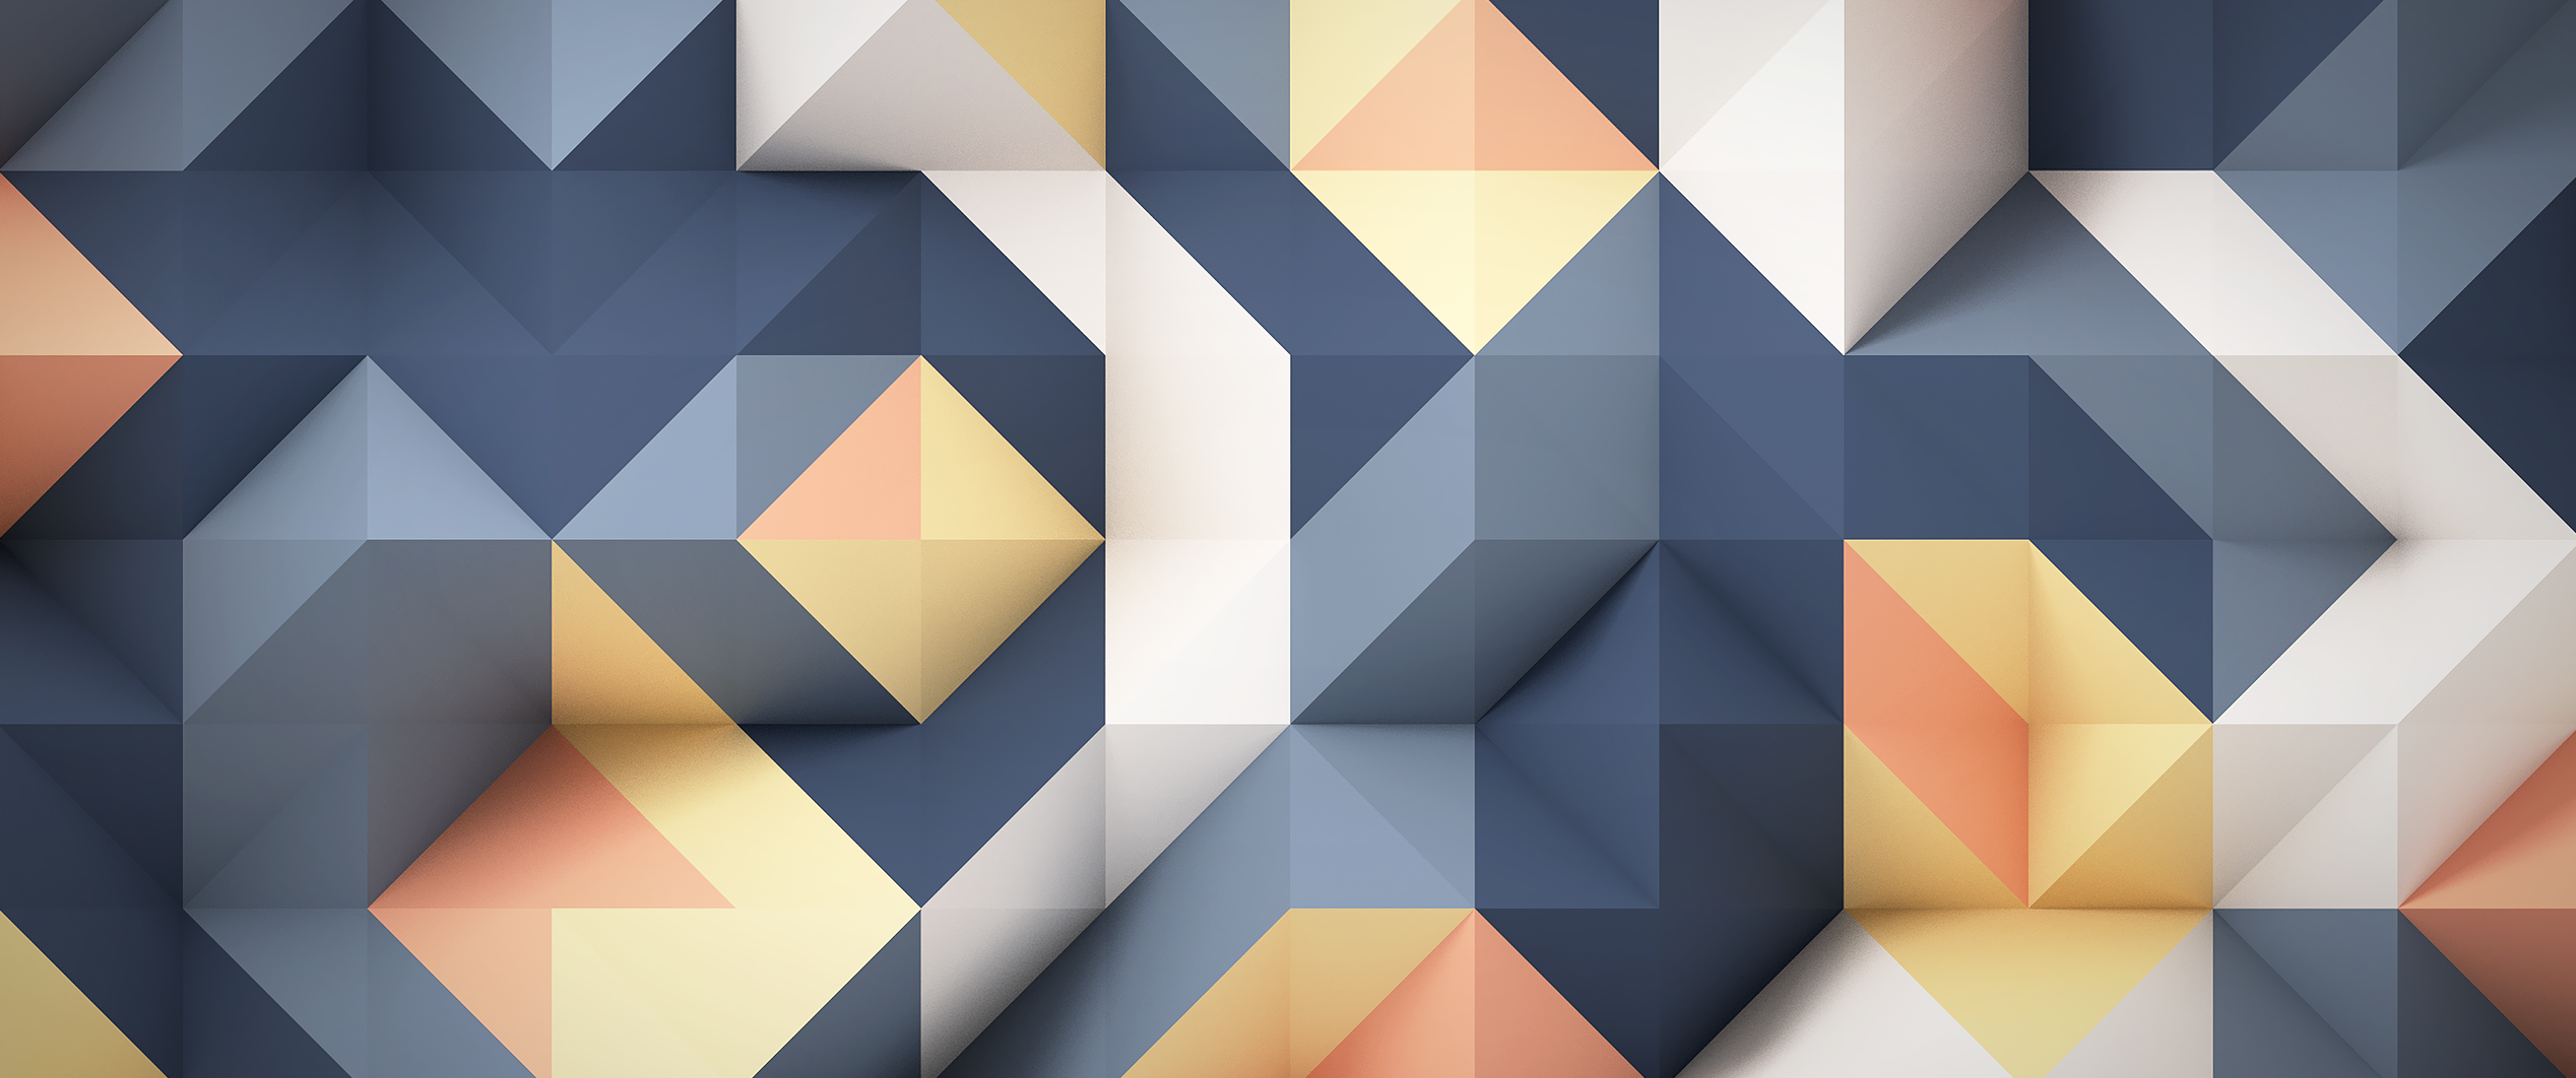 General 3440x1440 abstract low poly digital art texture